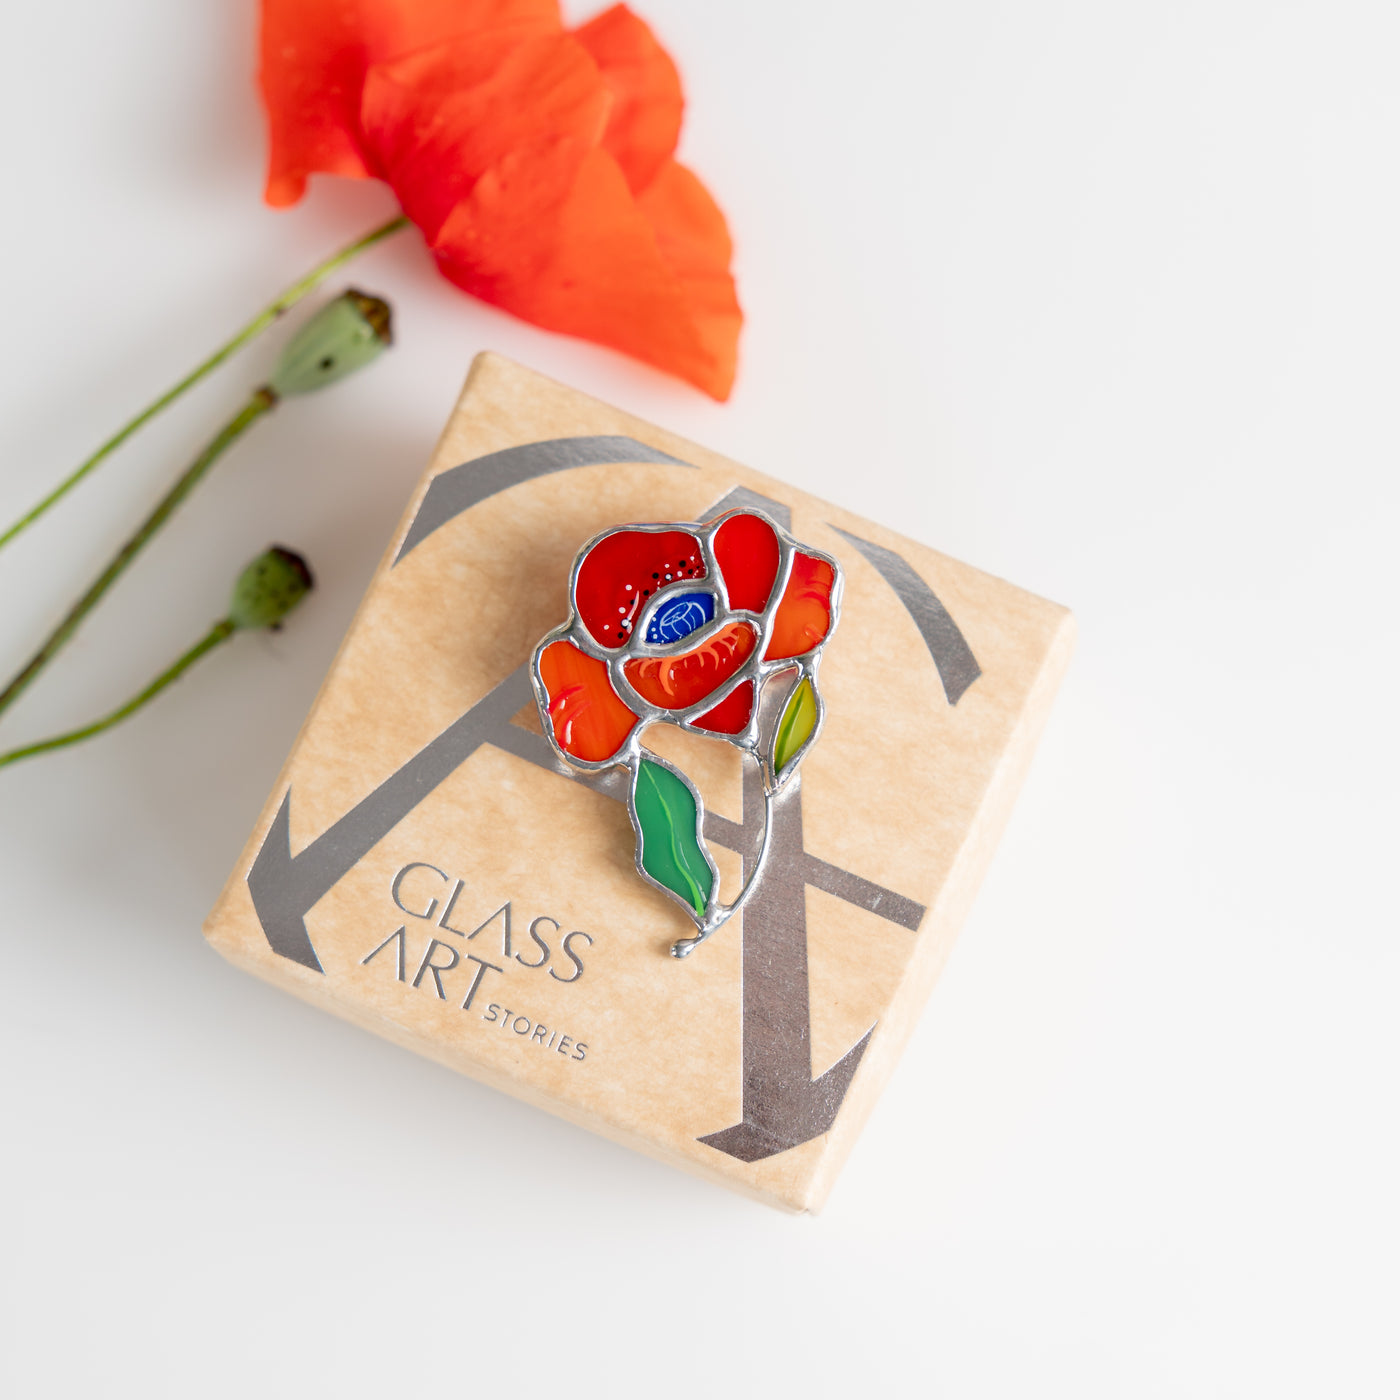 Stained glass poppy flower with green leaf pin